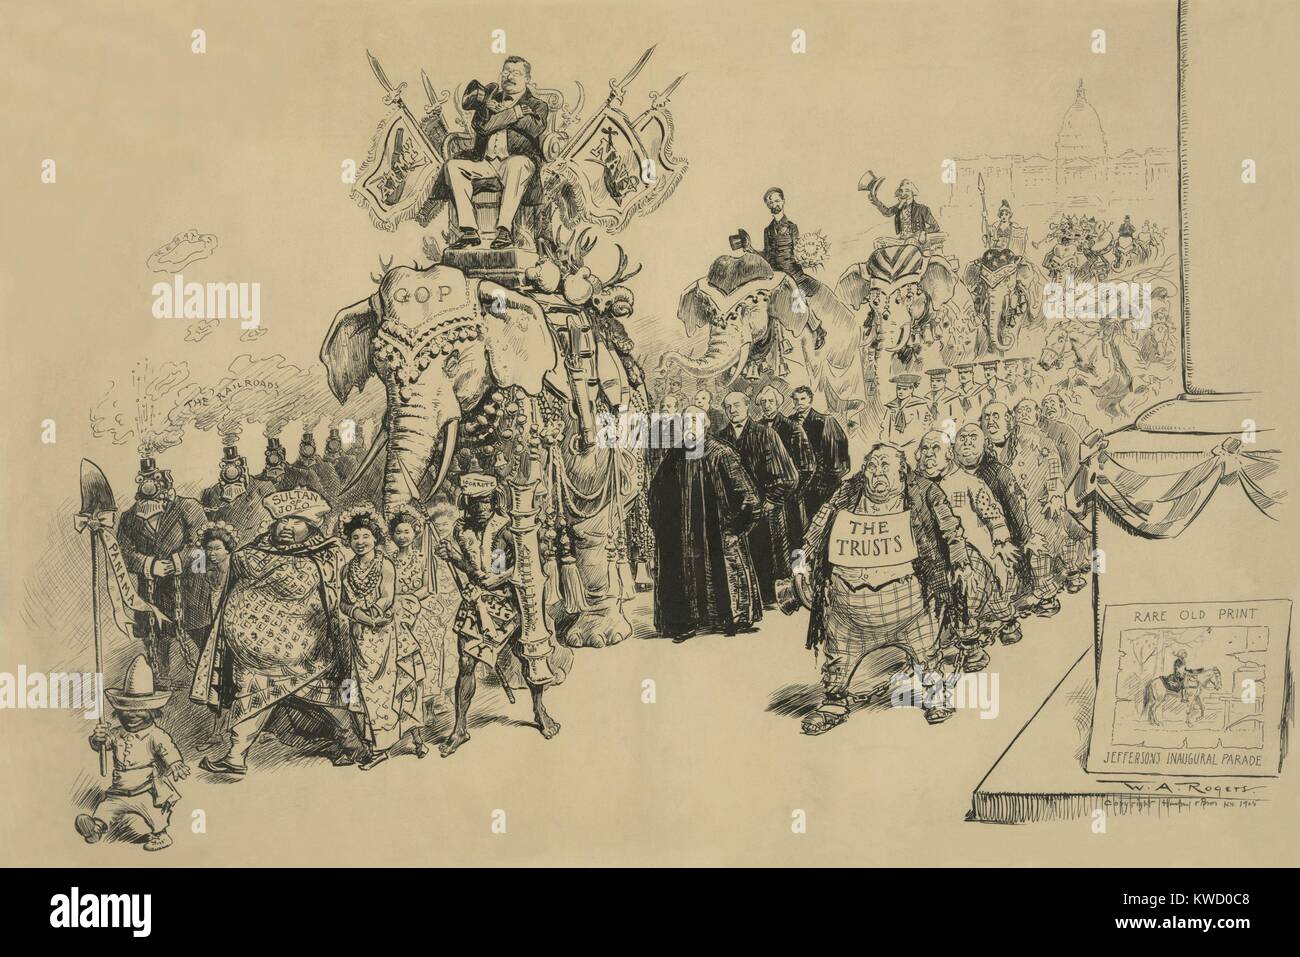 THE GREAT AMERICAN DURBAR, by William A. Rogers, c. 1905. Cartoon showing President Theodore Roosevelt riding in Triumph. Roosevelt leads with VP Fairbanks with Uncle Sam following. Also marching are the railroads in chains and the trusts in tattered clothes. A small man carrying shovel labeled Panama leads the procession. At right is a contrasting image of Thomas Jefferson alone, riding a horse, on his inauguration day (BSLOC 2017 6 30) Stock Photo